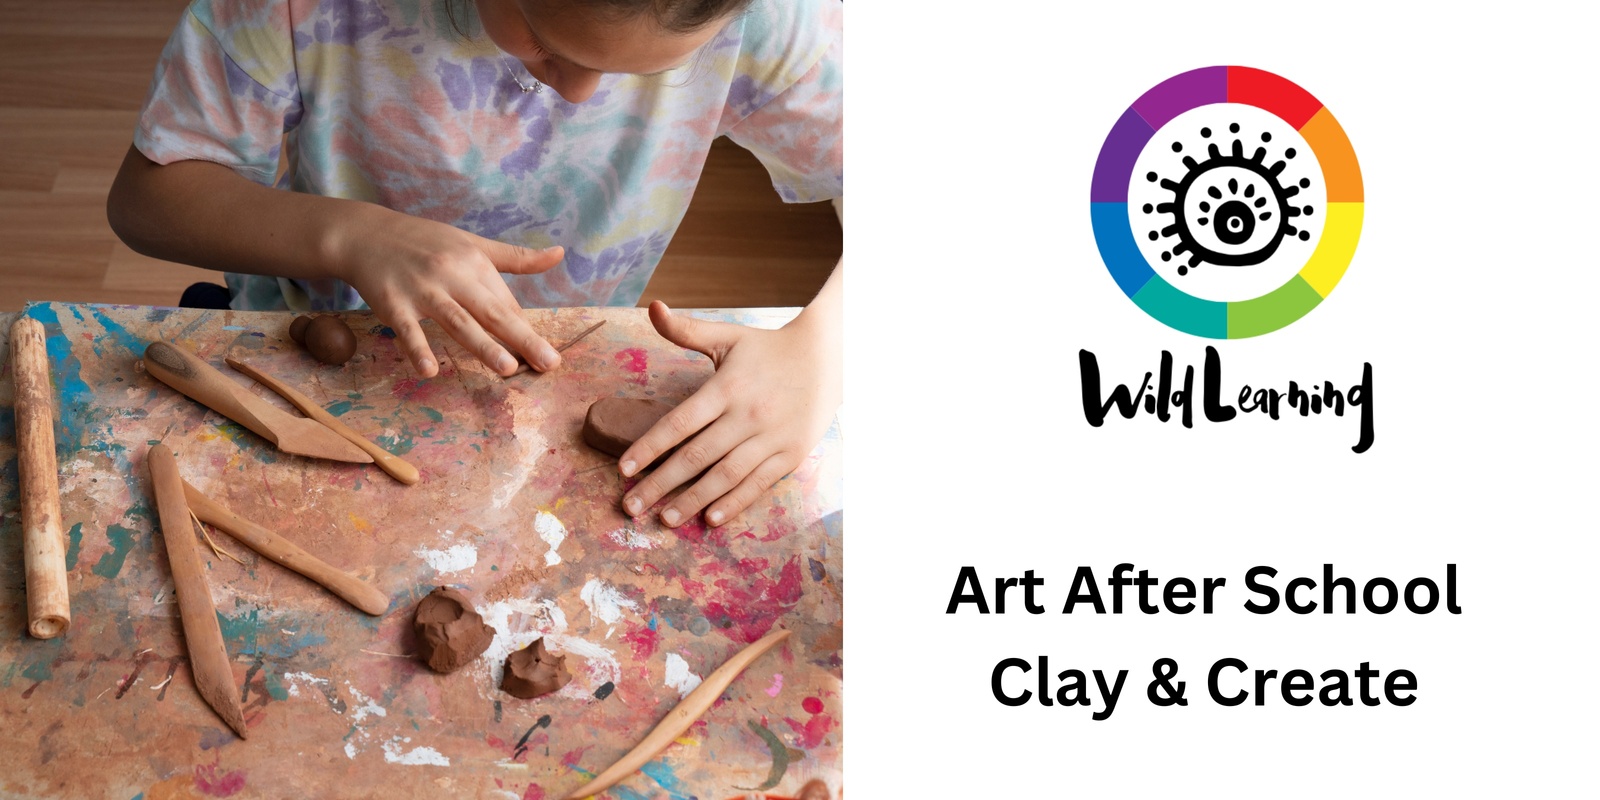 Banner image for Afterschool Art classes - Clay & Create